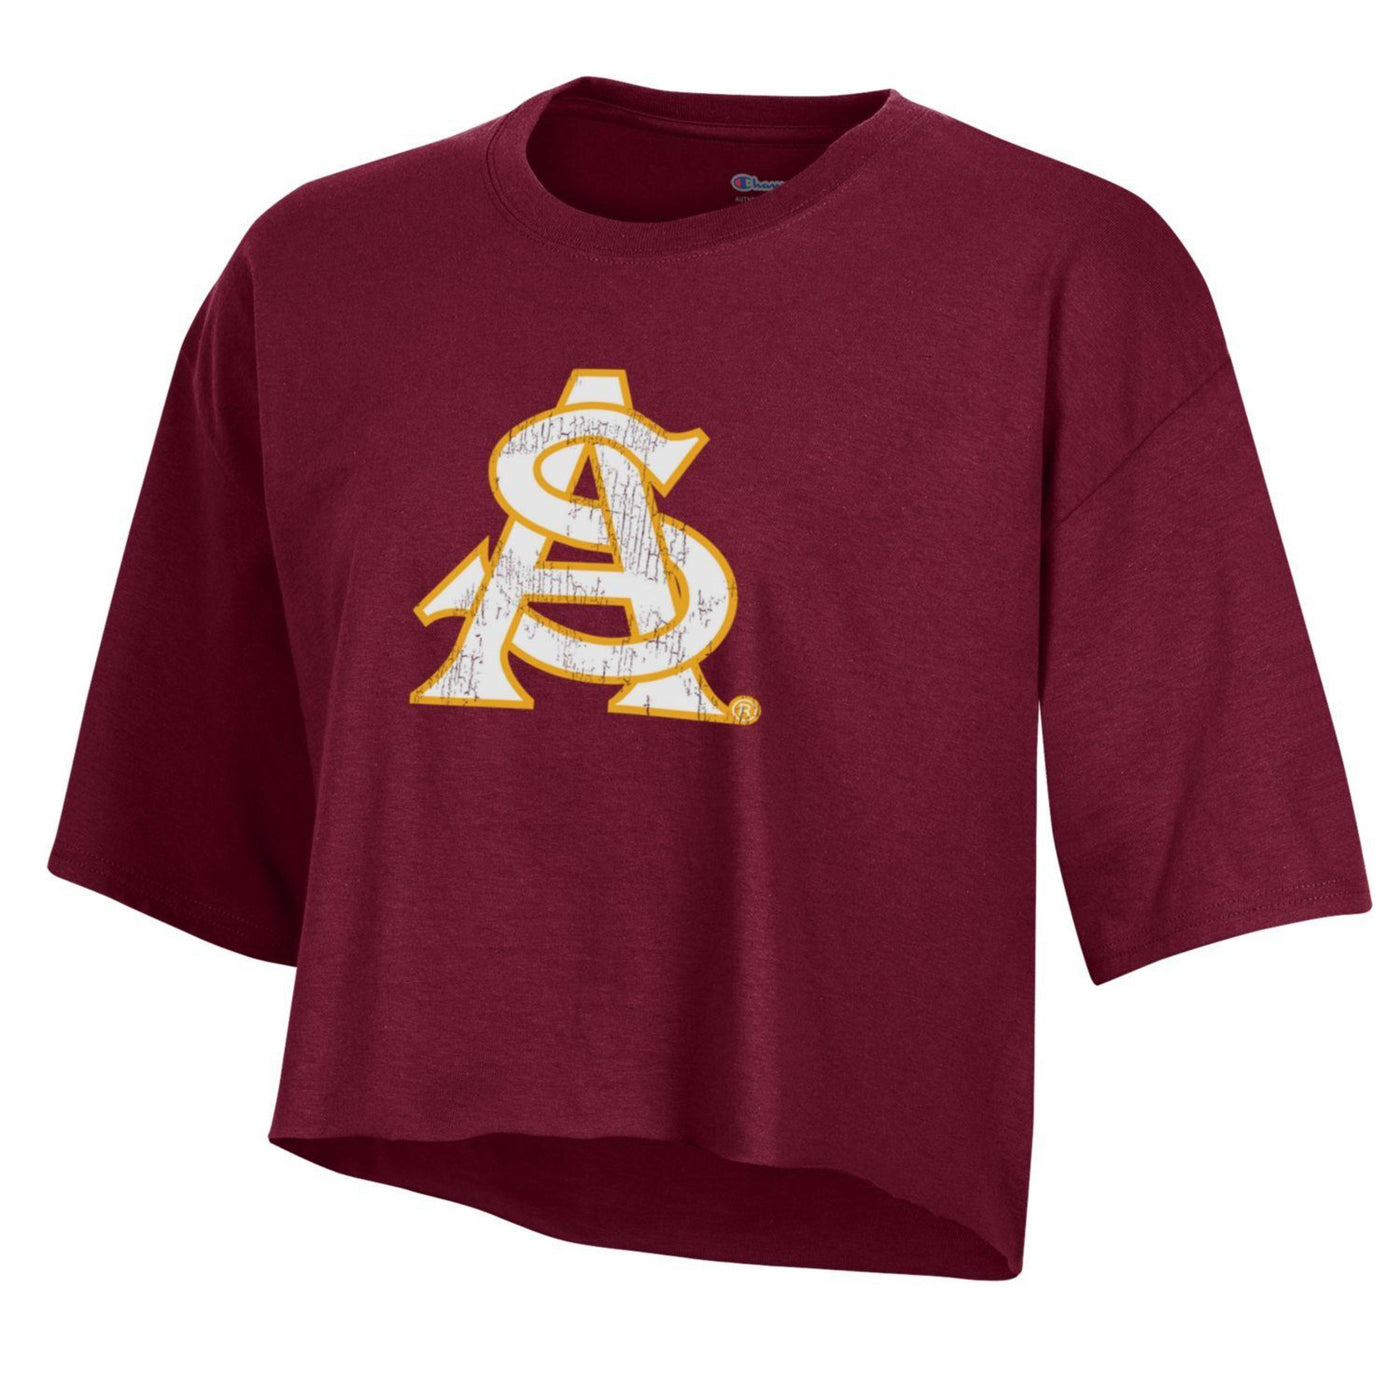 ASU maroon crop top with the interlocking a&s logo large on the front in white outlined in gold.